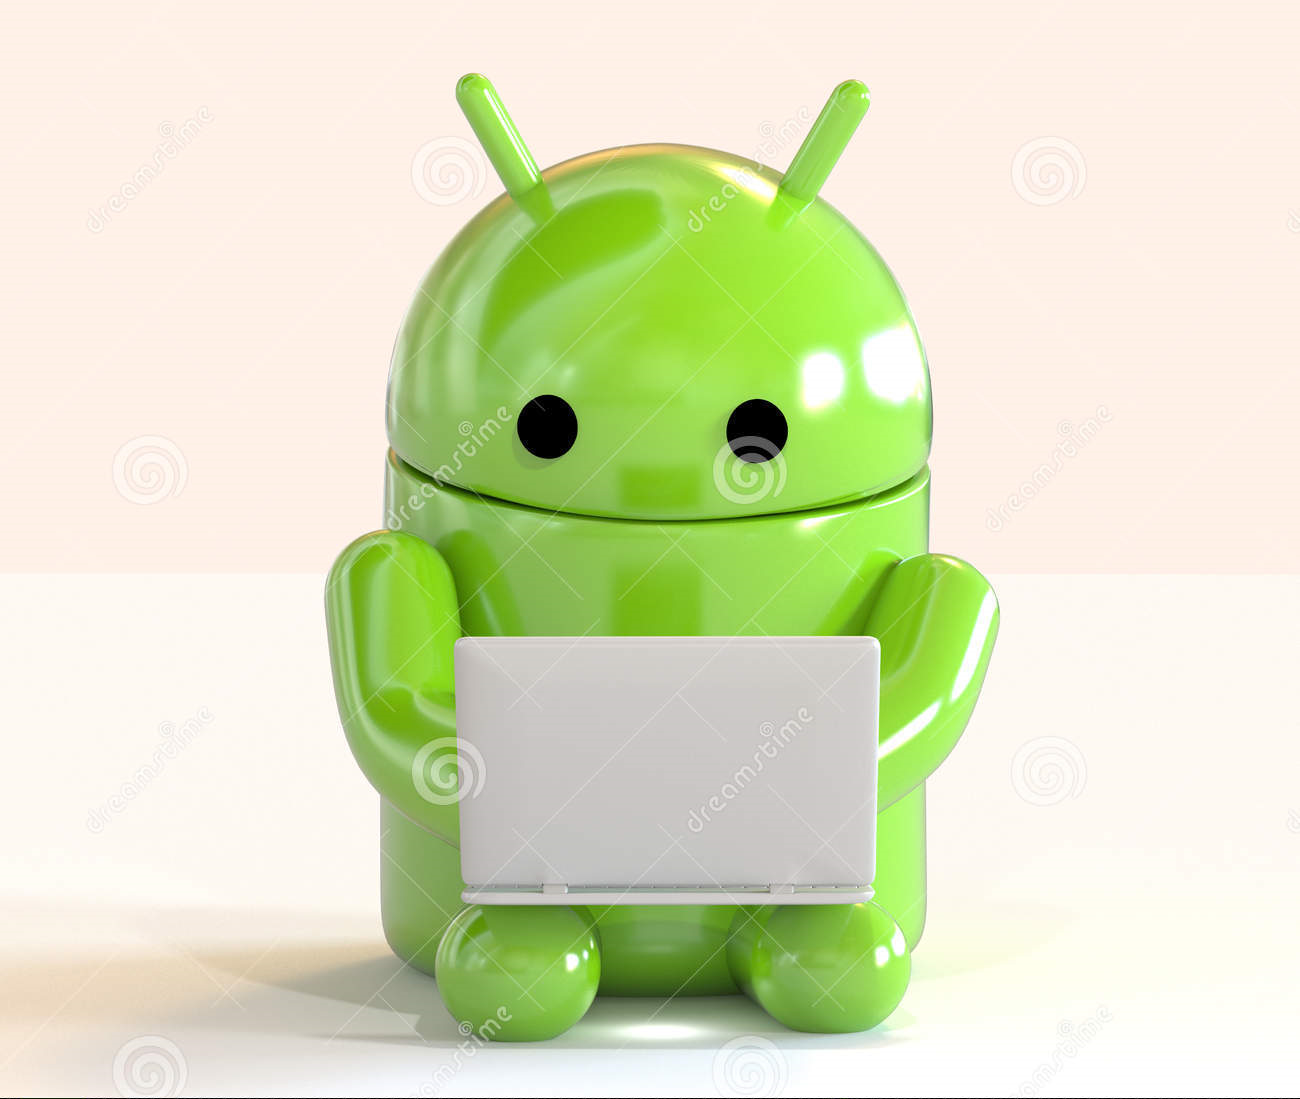 lloyd-android-system-logo-working-laptop-white-background-green-robot-48433289.png